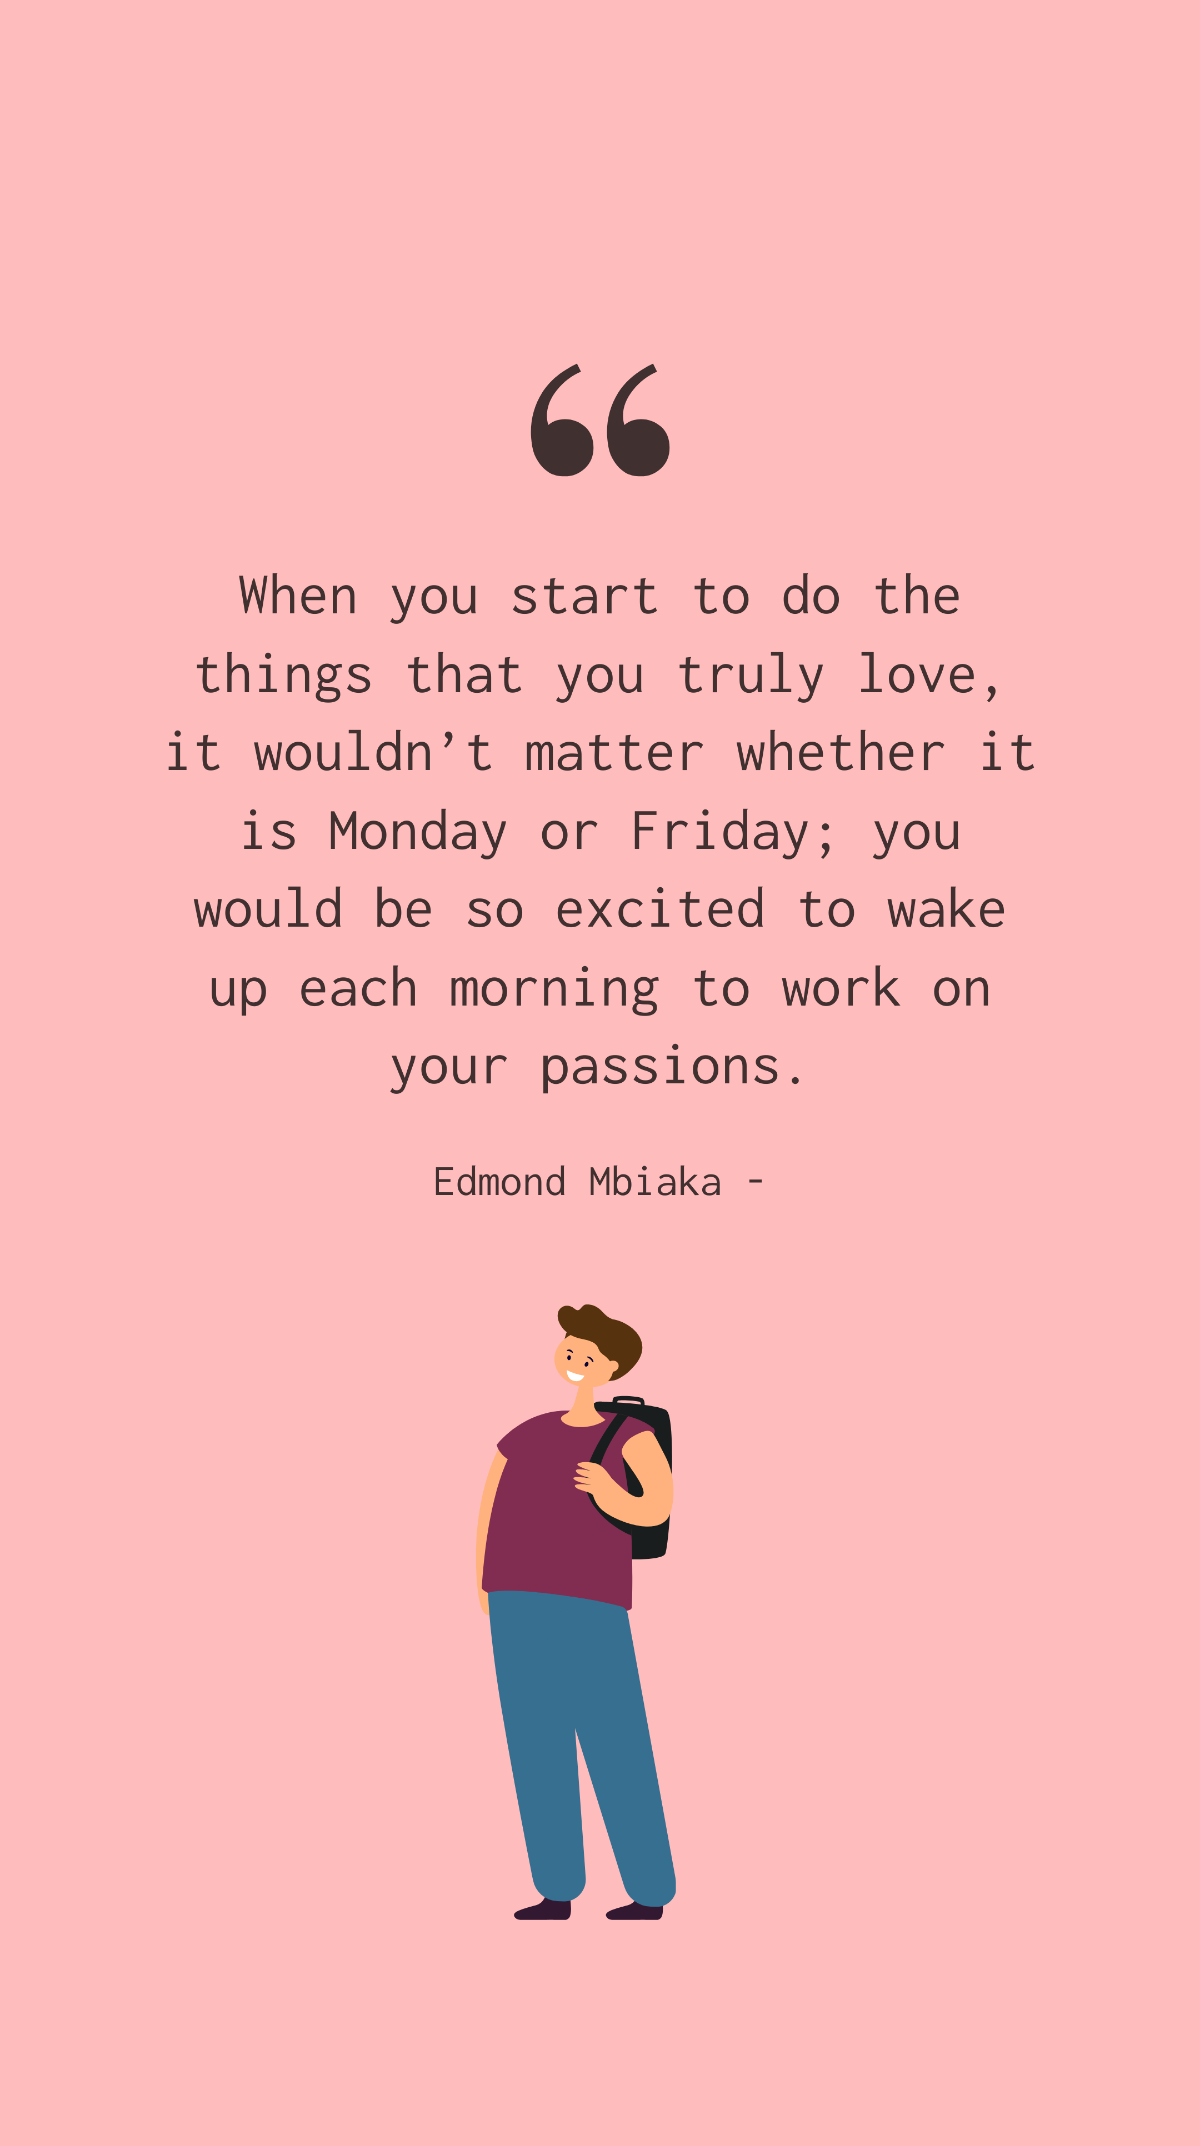 Edmond Mbiaka - When you start to do the things that you truly love, it wouldn’t matter whether it is Monday or Friday; you would be so excited to wake up each morning to work on your passions. Templa